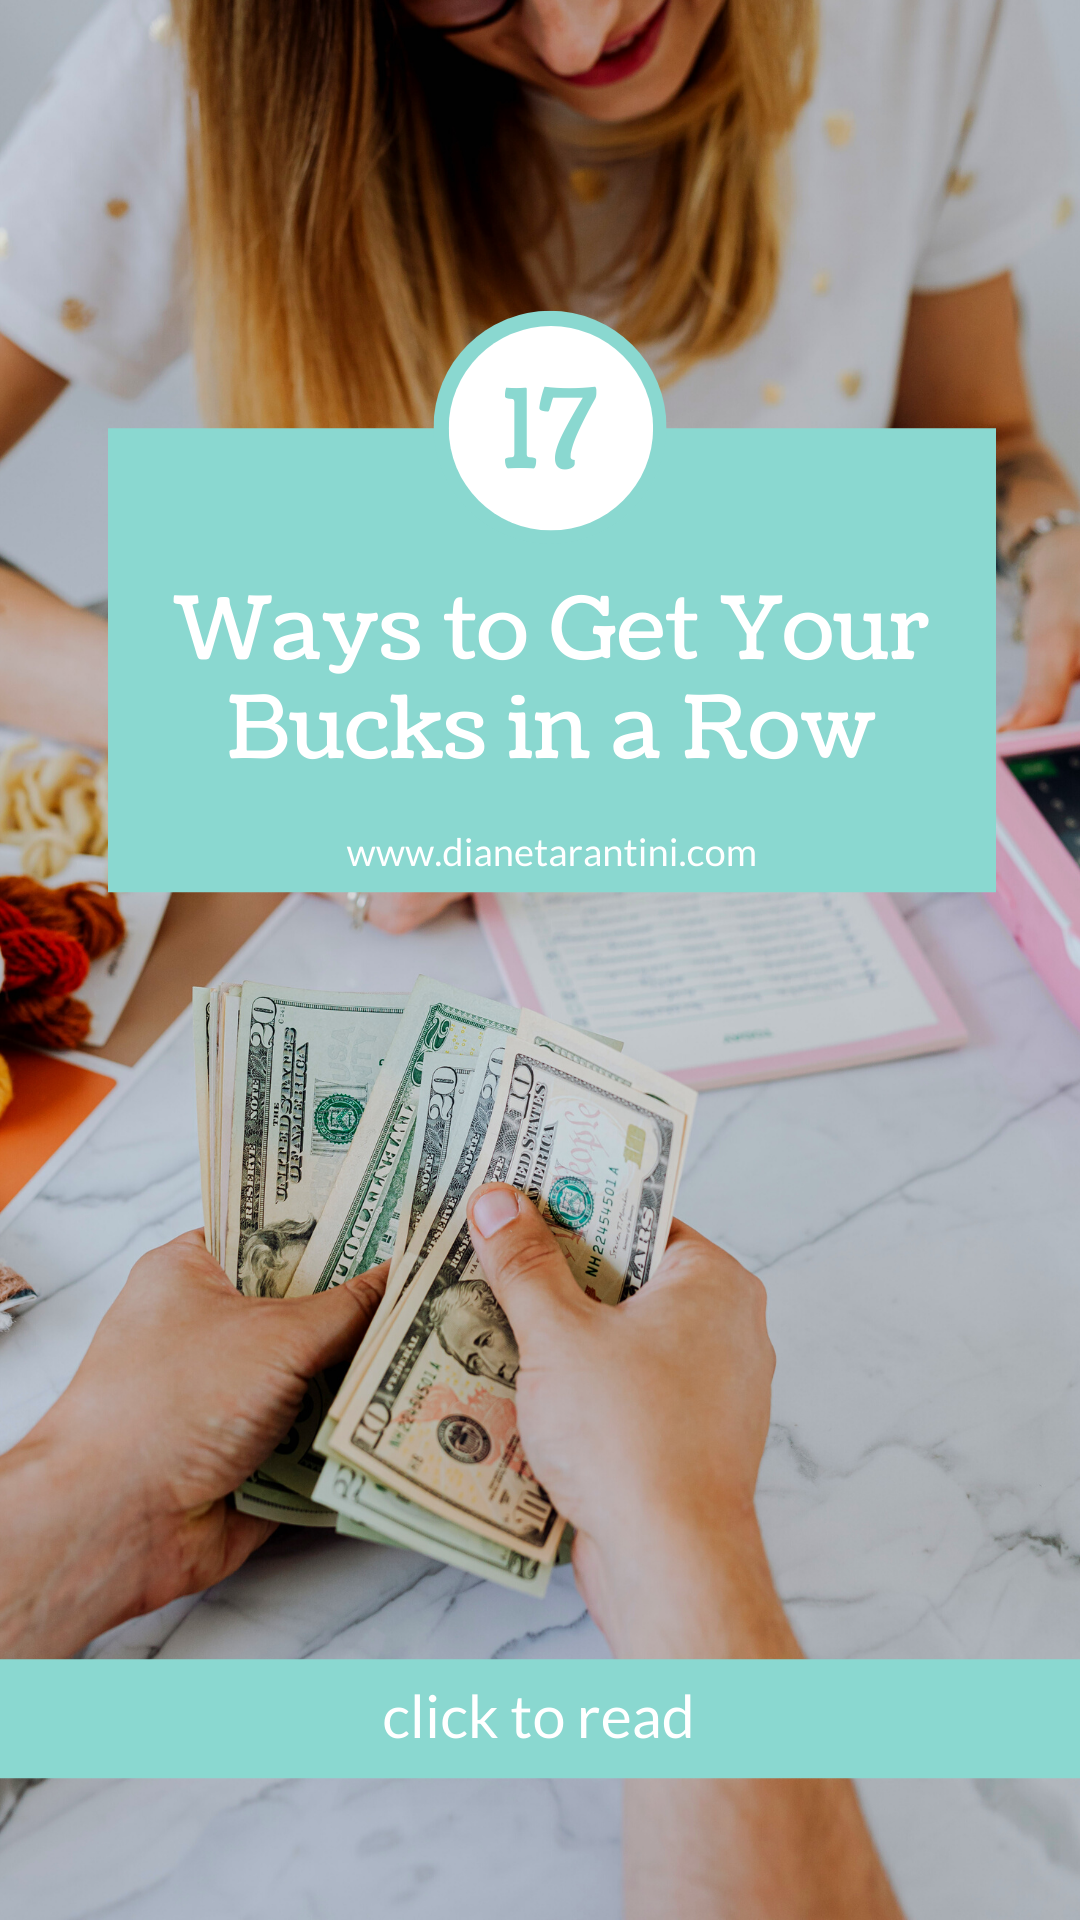 Budgeting and money management - how to get your bucks in a row